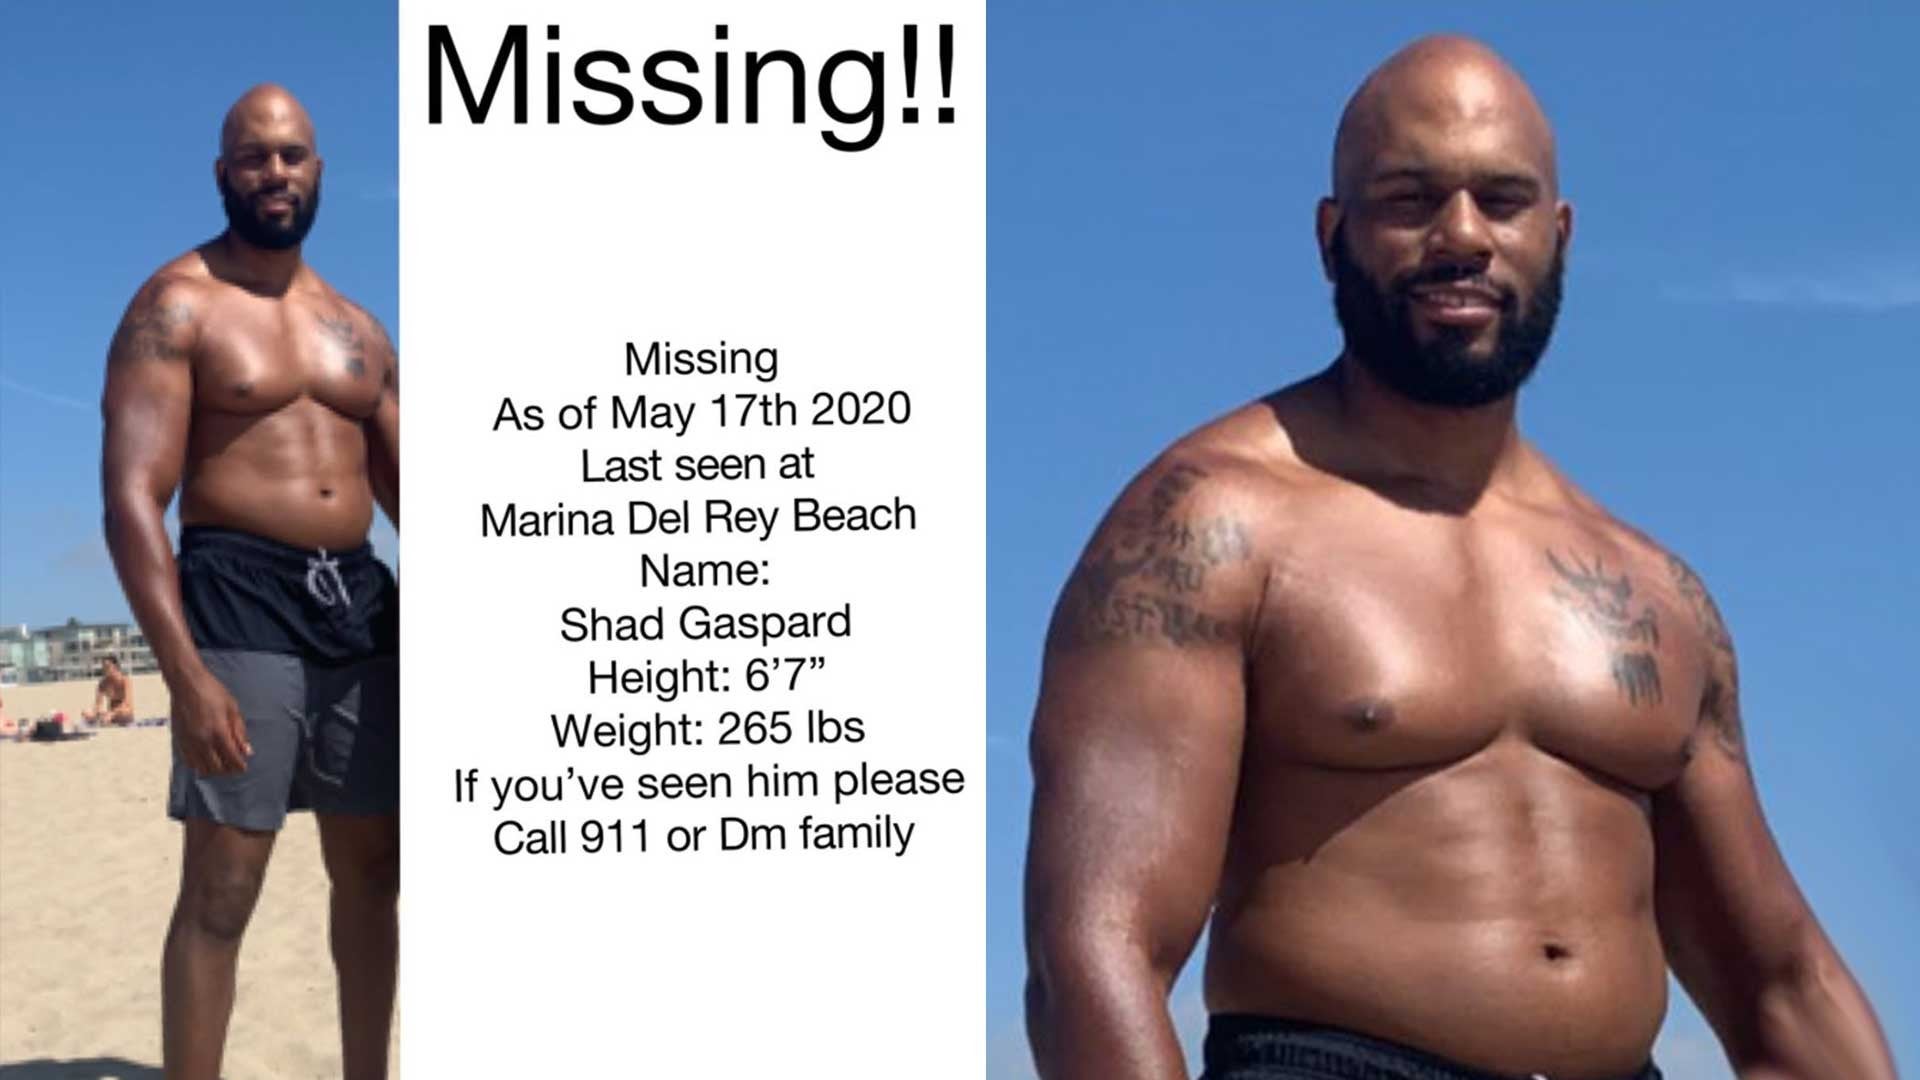 Former Wwe Star Shad Gaspard Missing After Swimming At Venice